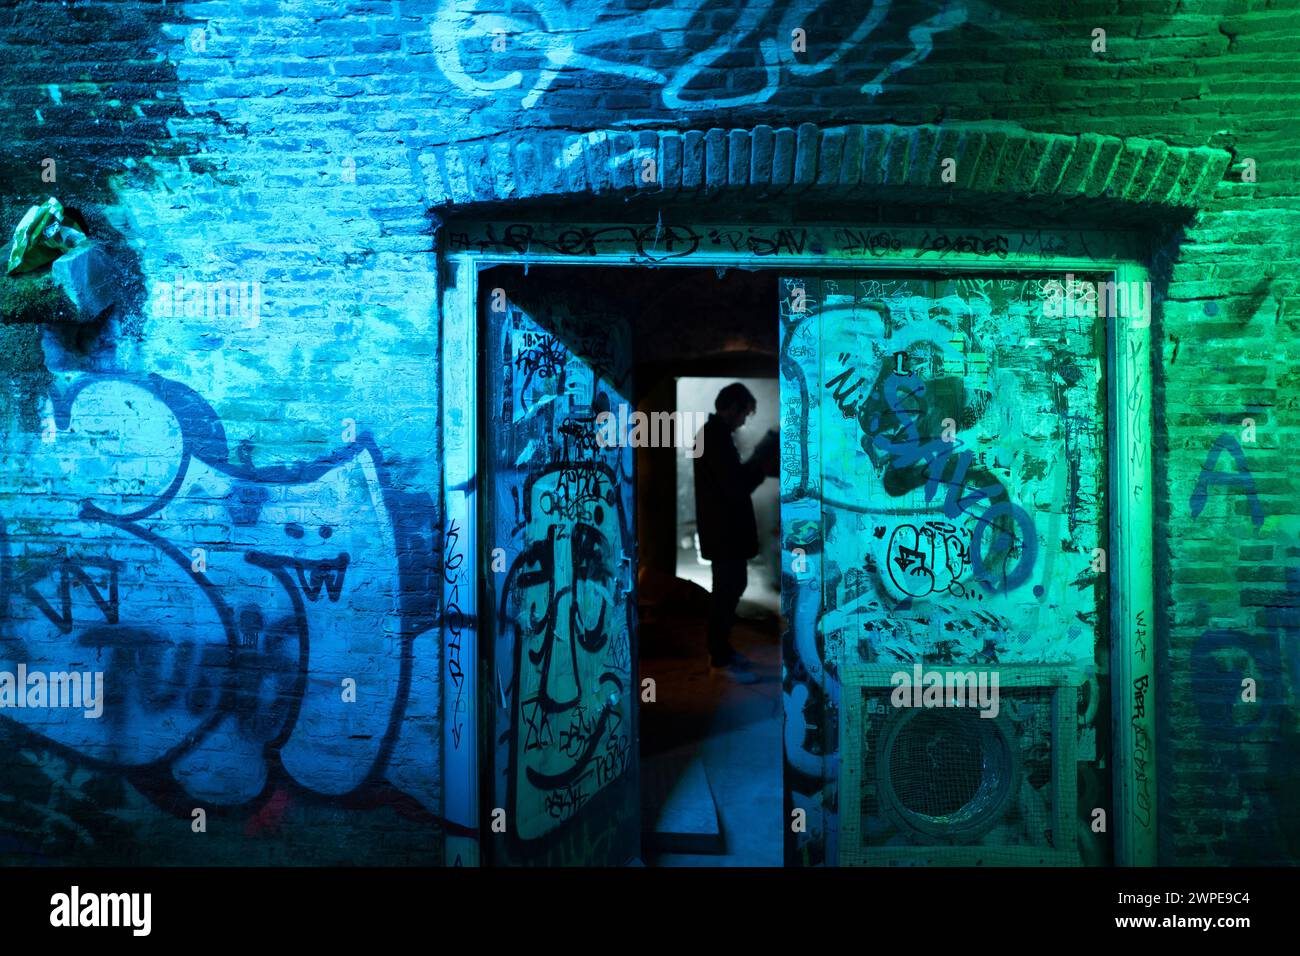 Amsterdam- Netherlands- Circa 2019. Fashionable place and a man silhouette at foreground. Ancient graffiti painted wall lighted with blue color. Stock Photo